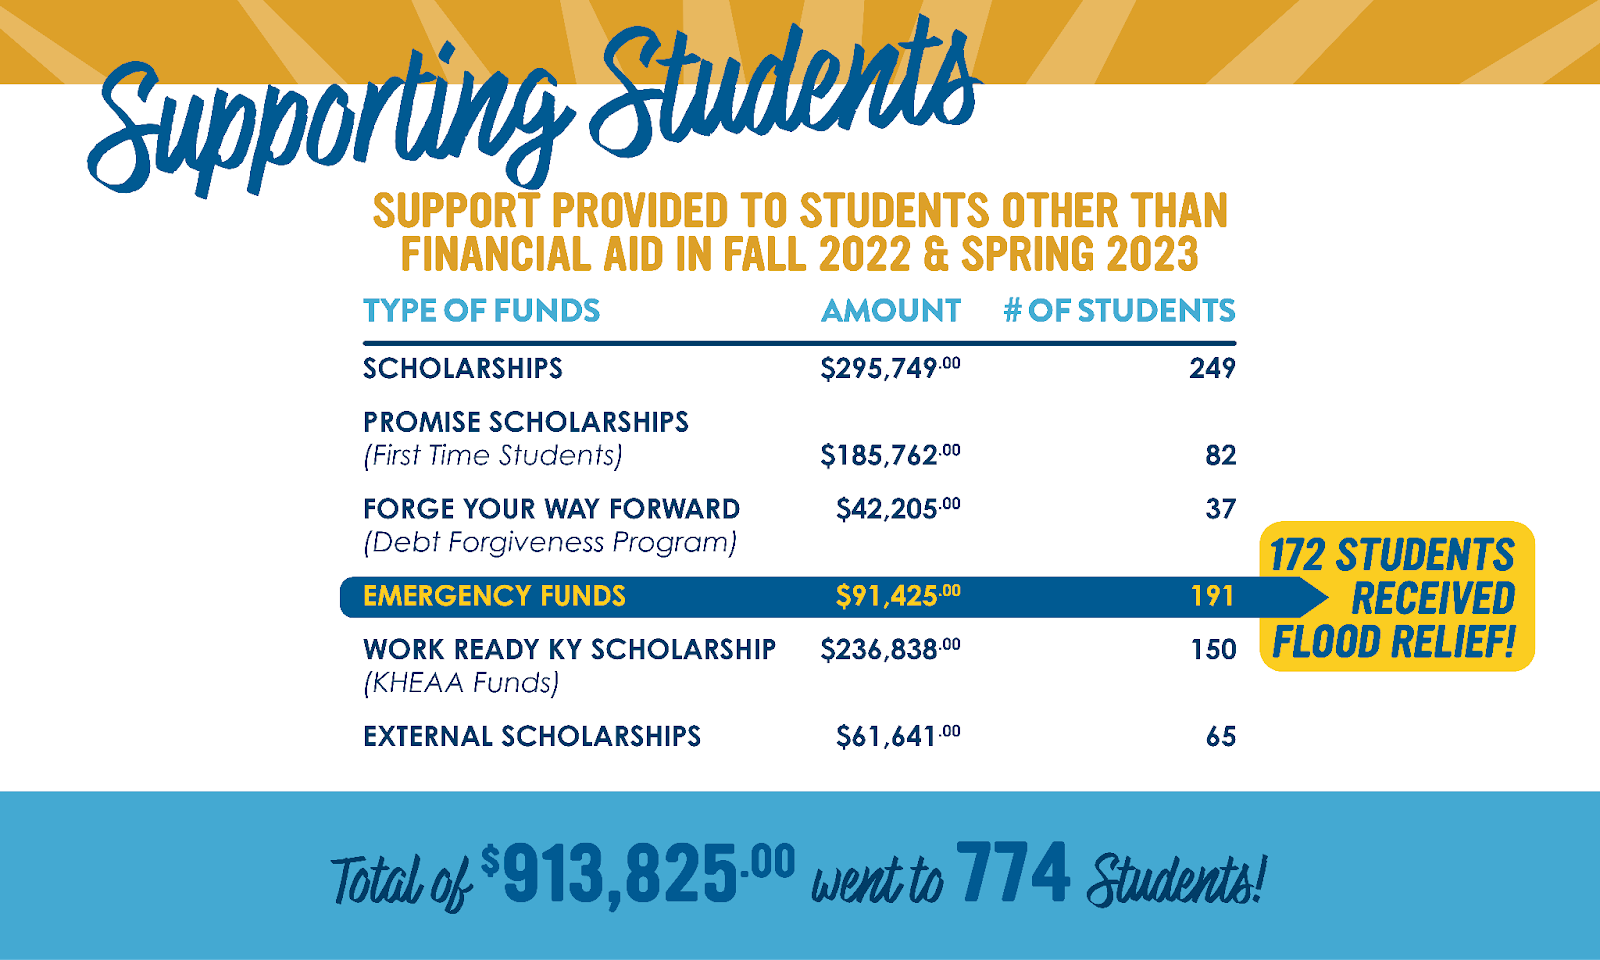 Supporting students. Support provided to students other than financial aid in Fall 2022 & Spring 2023. Scholarships — $295,749 — 249 students. Promise scholarships (first time students) — $185,762 — 82 students. Forge Your Way Forward (Debt forgiveness program) — $42,205 — 37 students. Emergency funds — $91,425 — 191 students. 172 students received flood relief. Work Ready KY Scholarship (KHEAA funds) — $236,838 — 150 students. External scholarships — $61,641 — 65 students. Total of $913,825 went to 774 students!